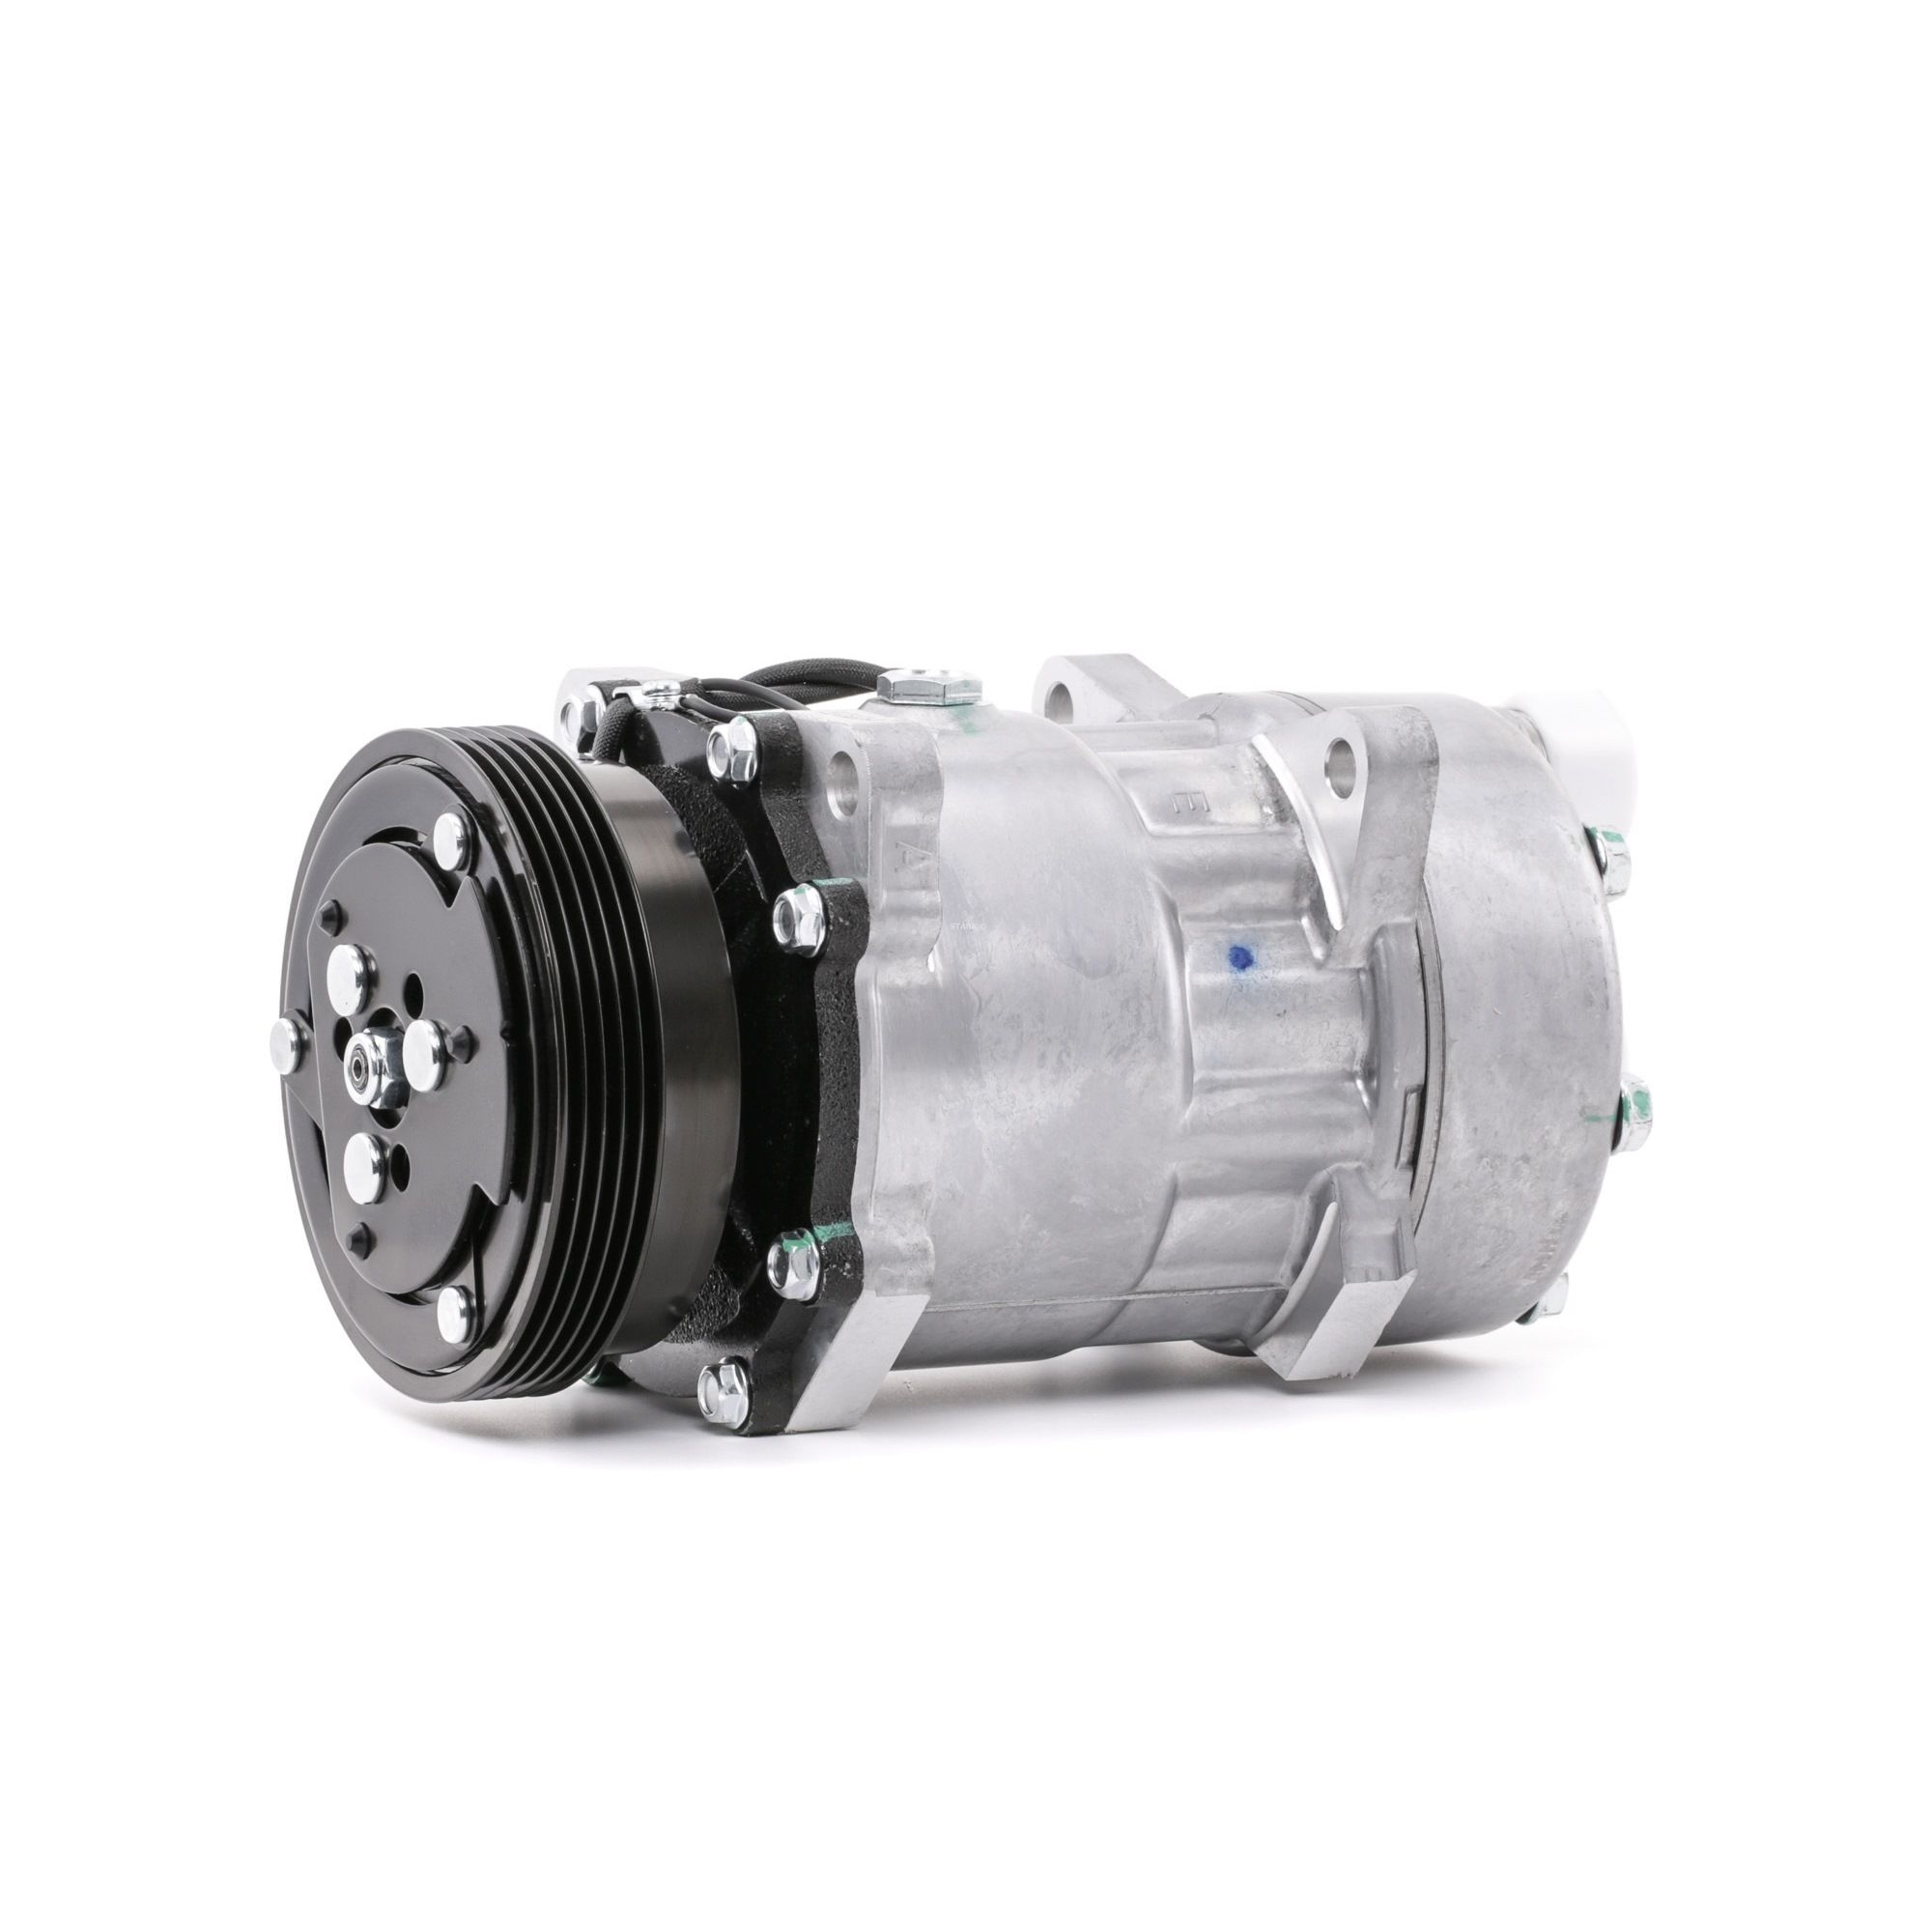 STARK SKKM-0340066 Air conditioning compressor SD7H15, PAG 100, R 134a, with PAG compressor oil